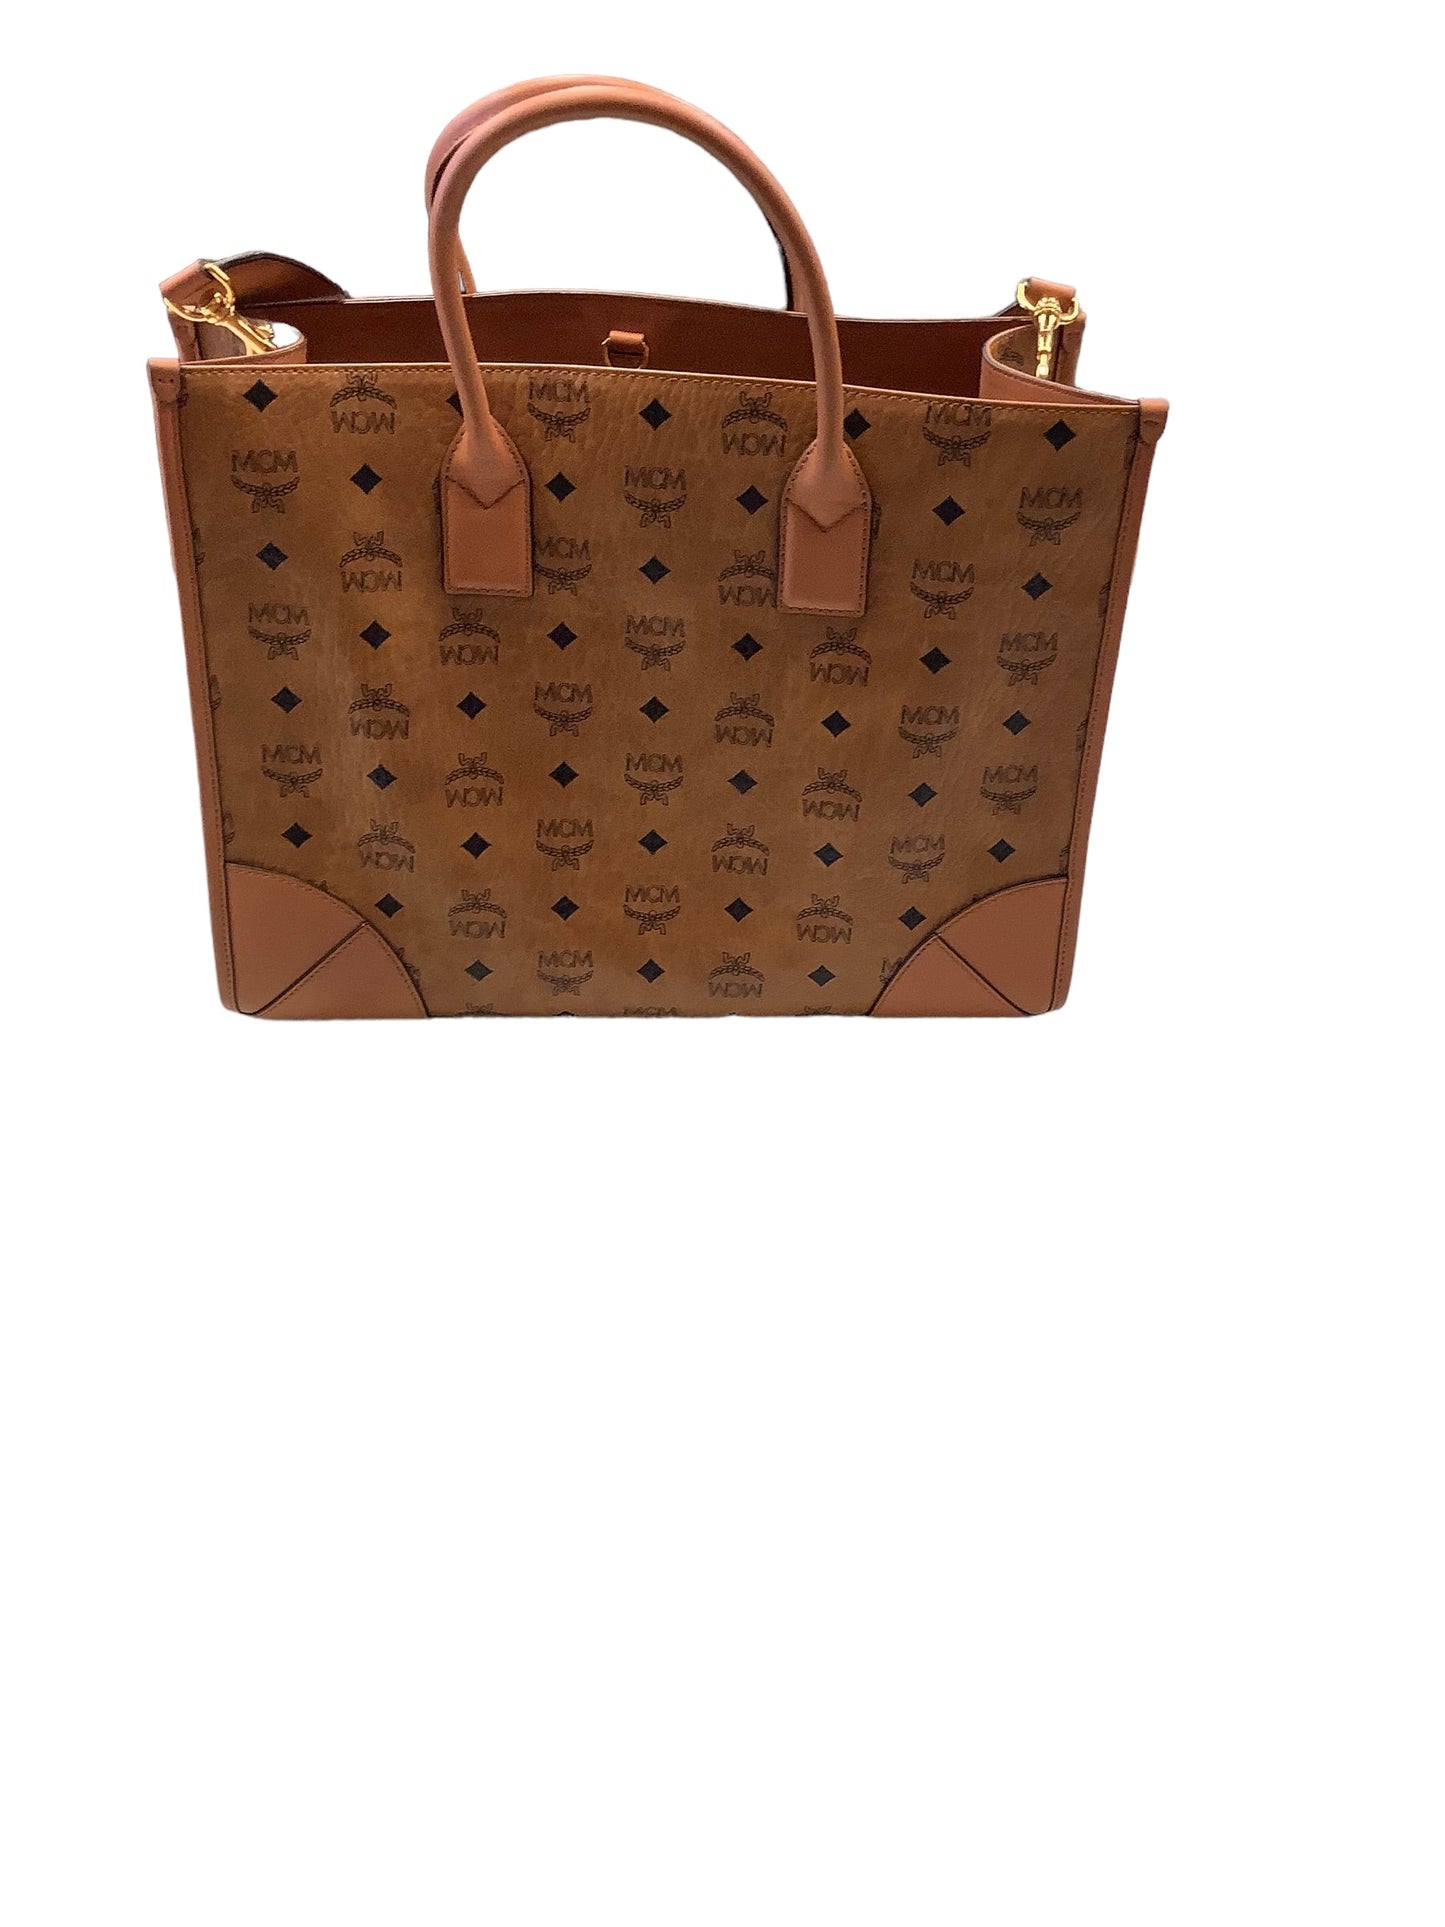 Tote Luxury Designer By Mcm  Size: Large